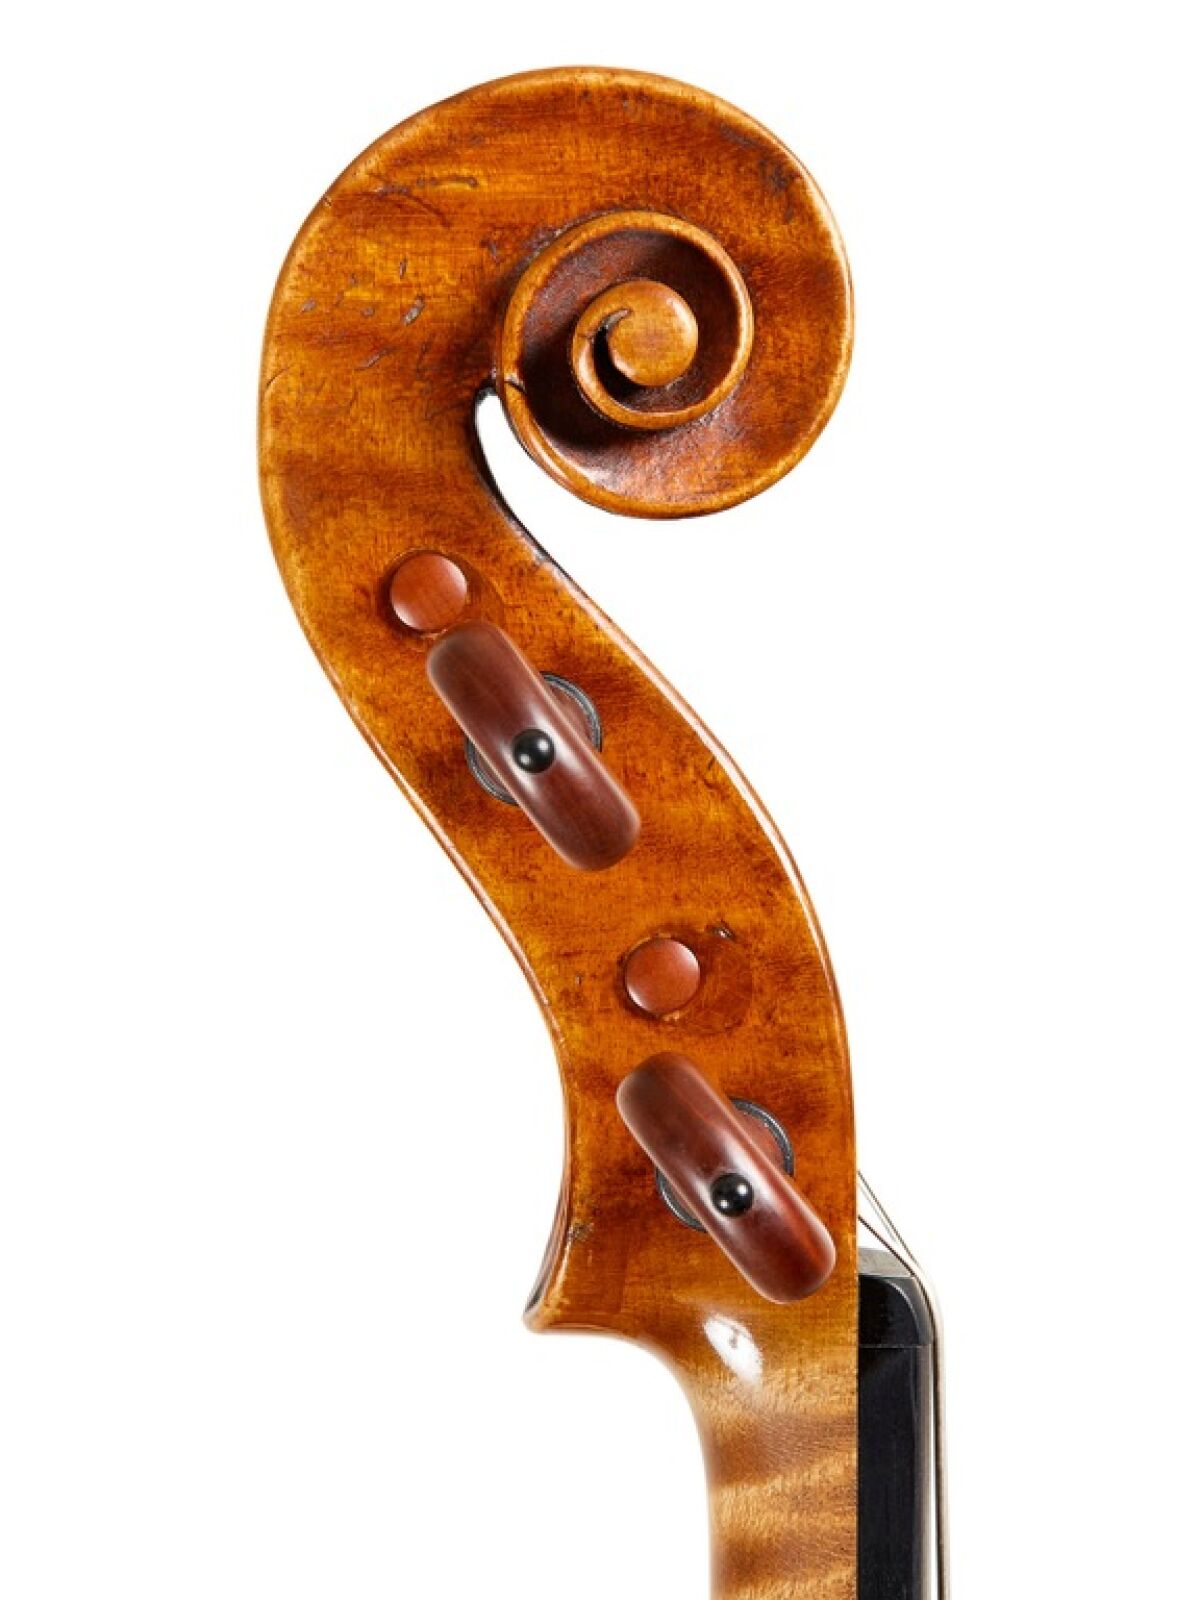 A detail of the rare 1710 Amati violin.